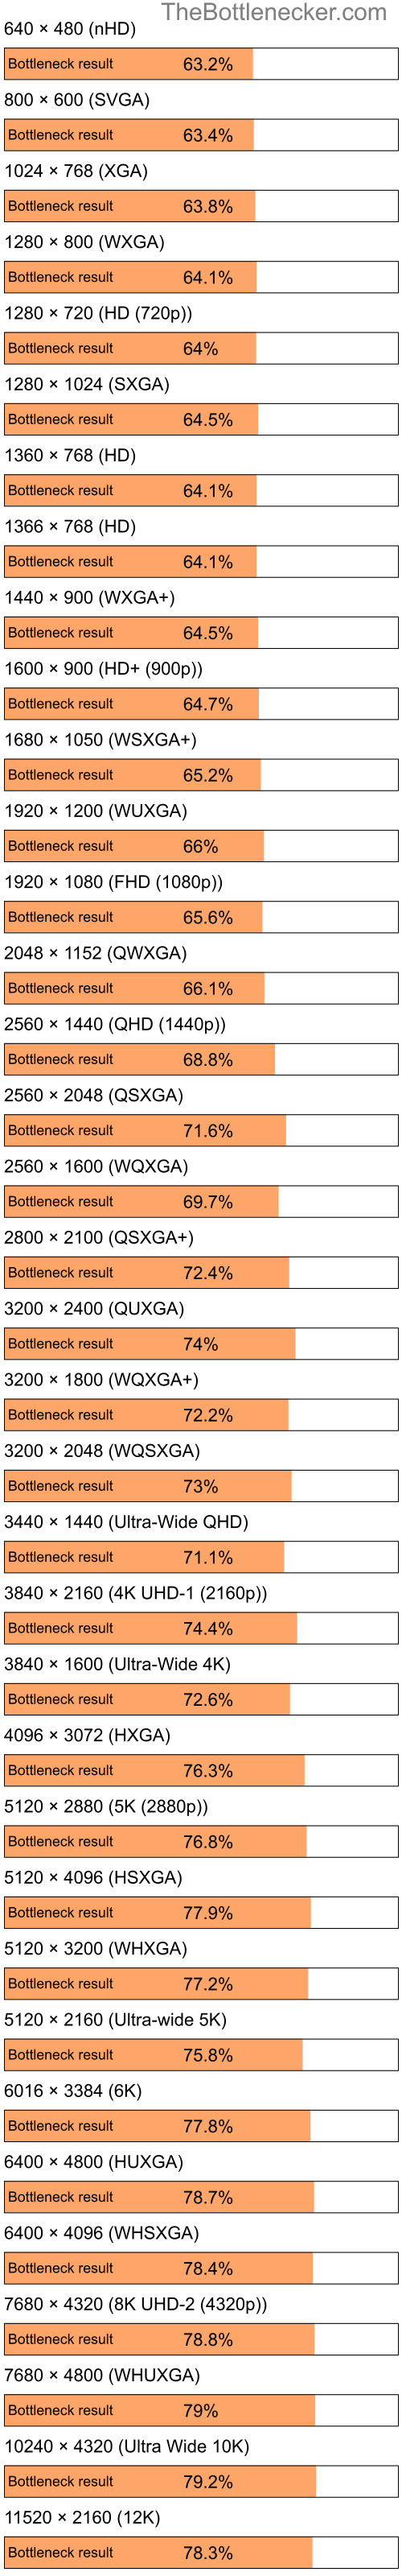 Bottleneck results by resolution for Intel Atom Z520 and AMD Mobility Radeon HD 3450 in General Tasks